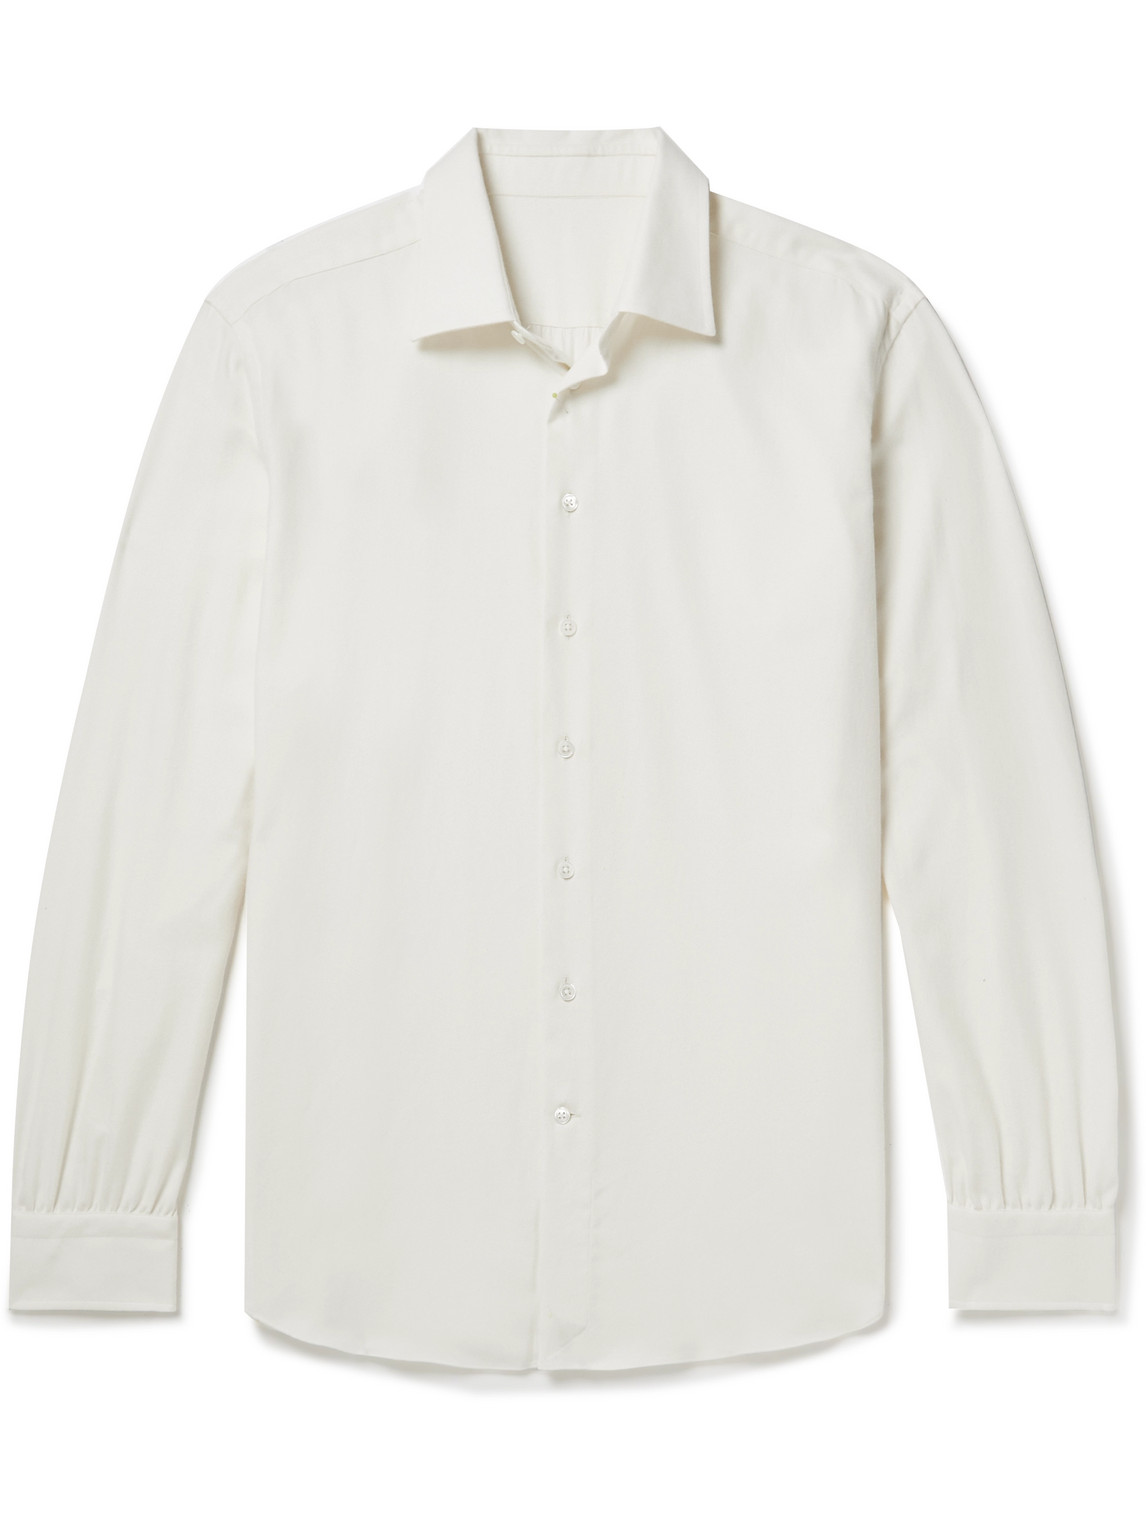 ANDERSON & SHEPPARD CASHMERE AND COTTON-BLEND TWILL SHIRT